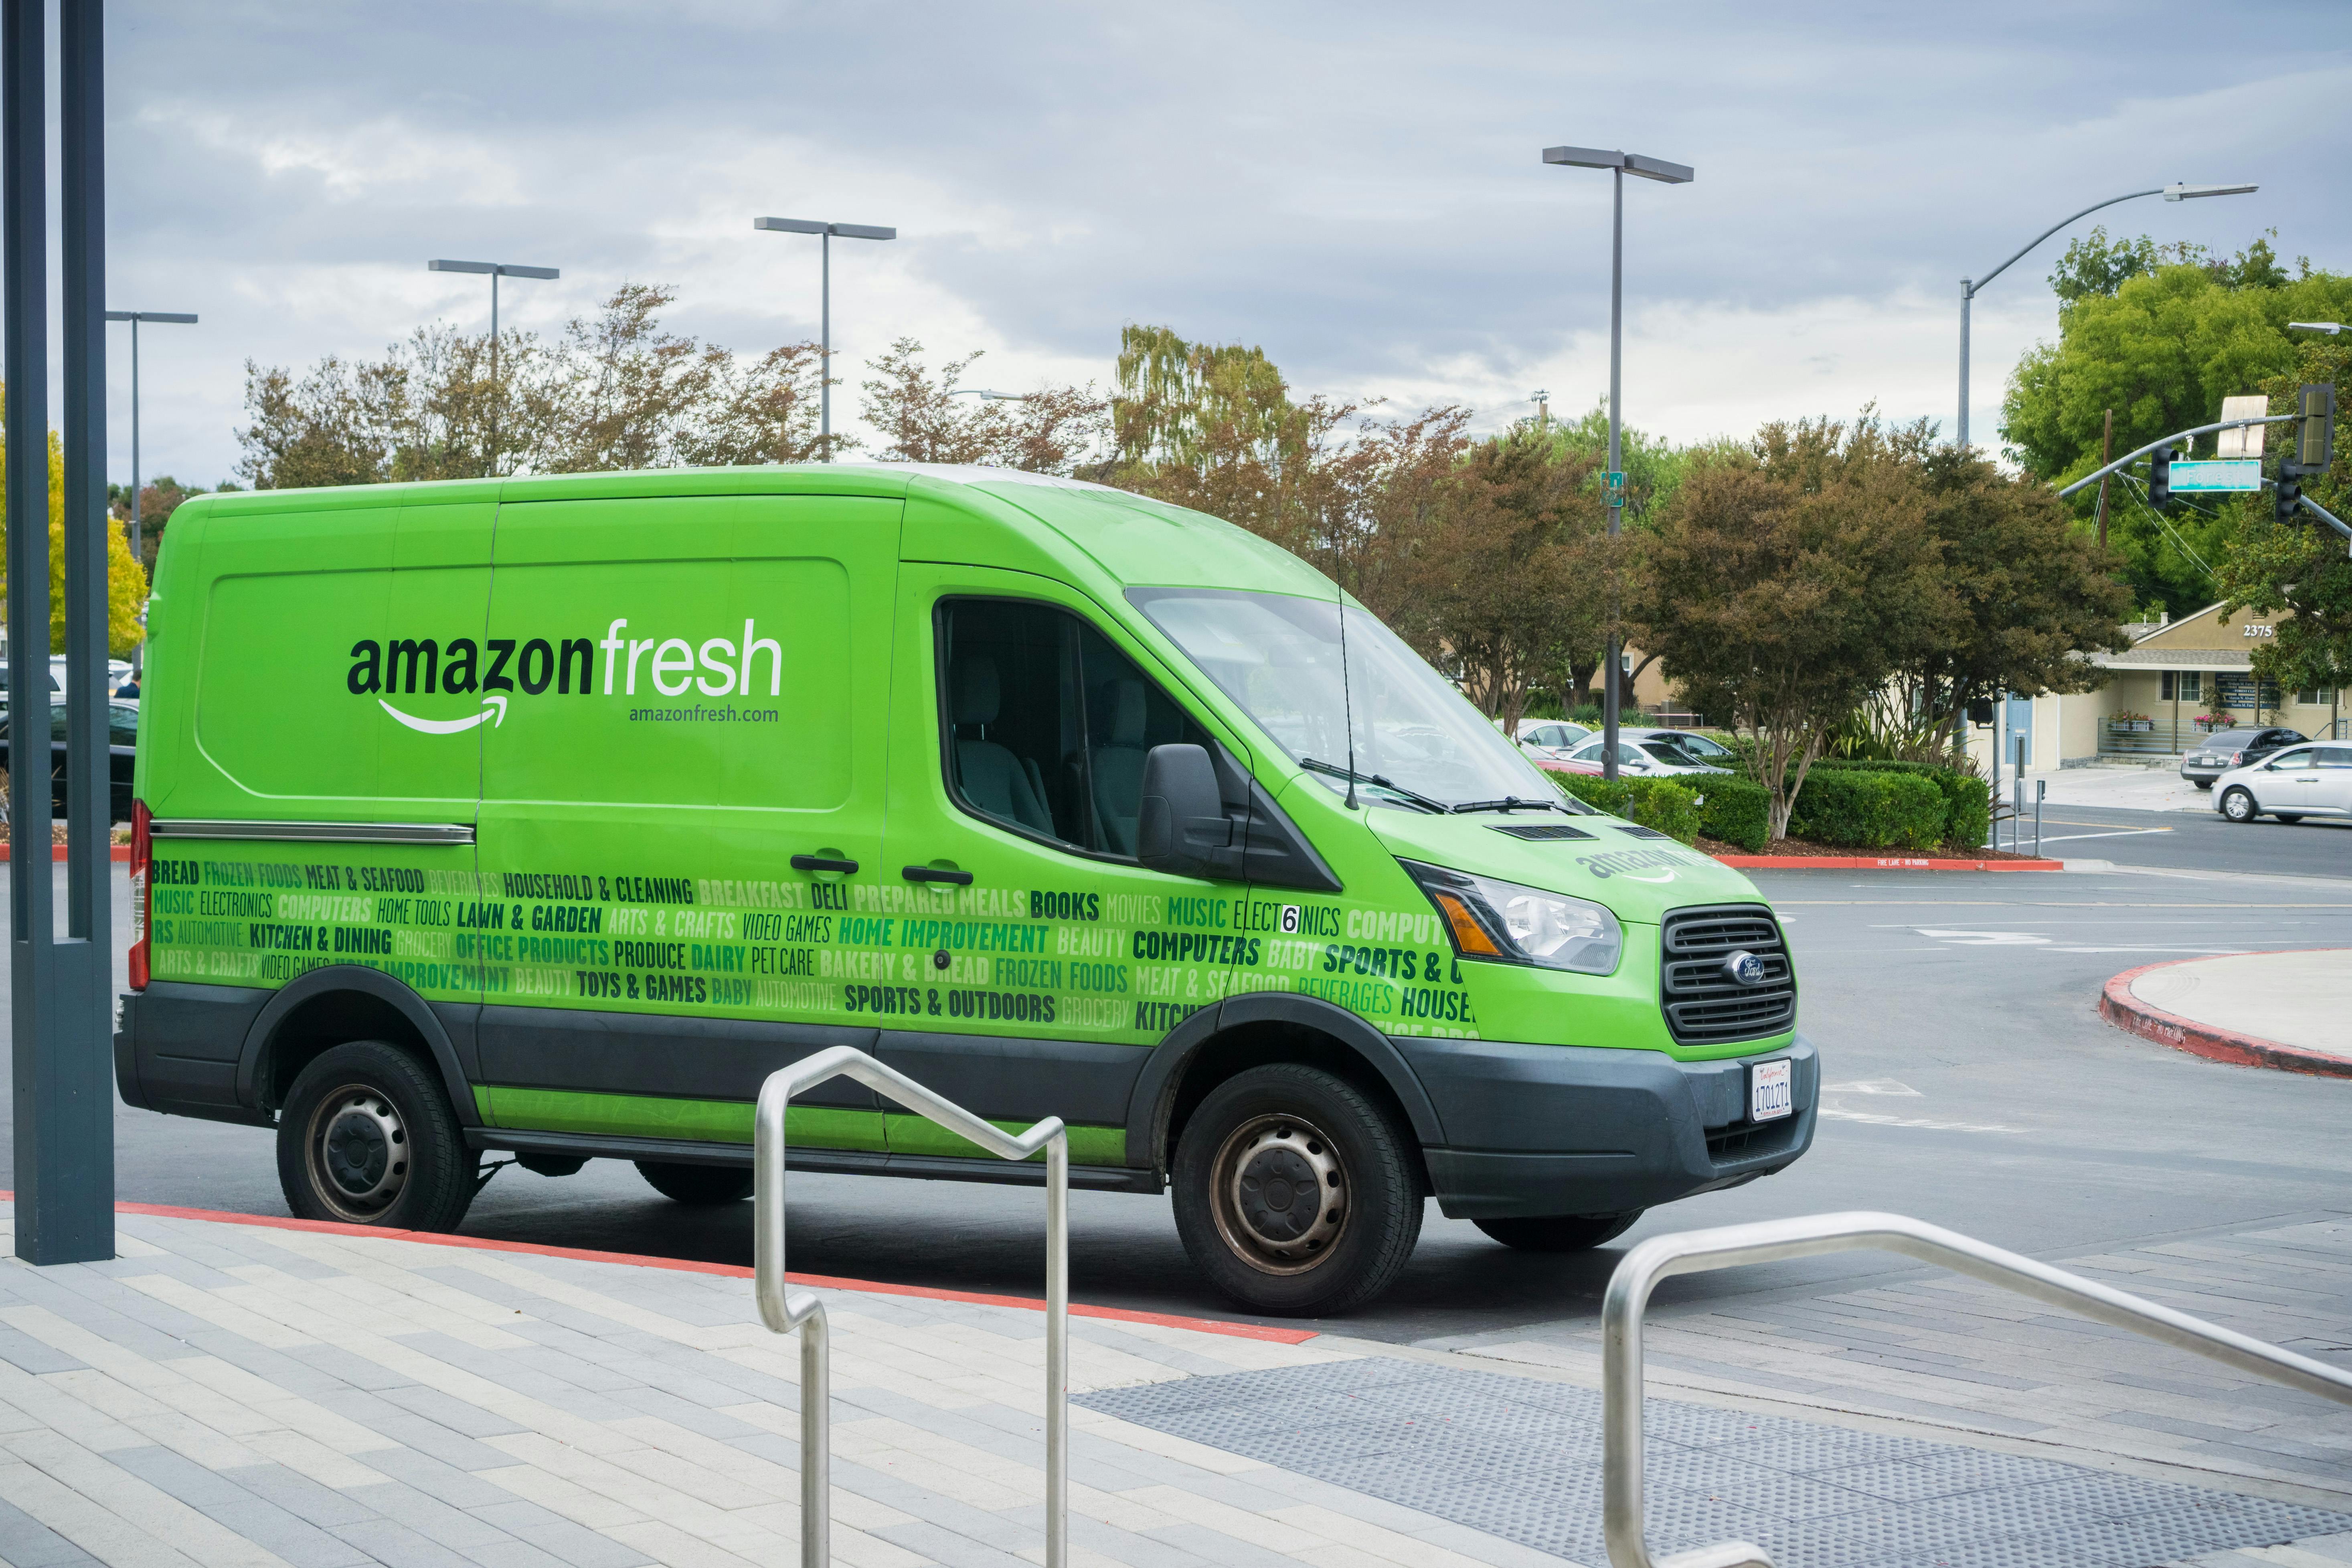 A green amazon fresh delivery truck parked in a parking lot.